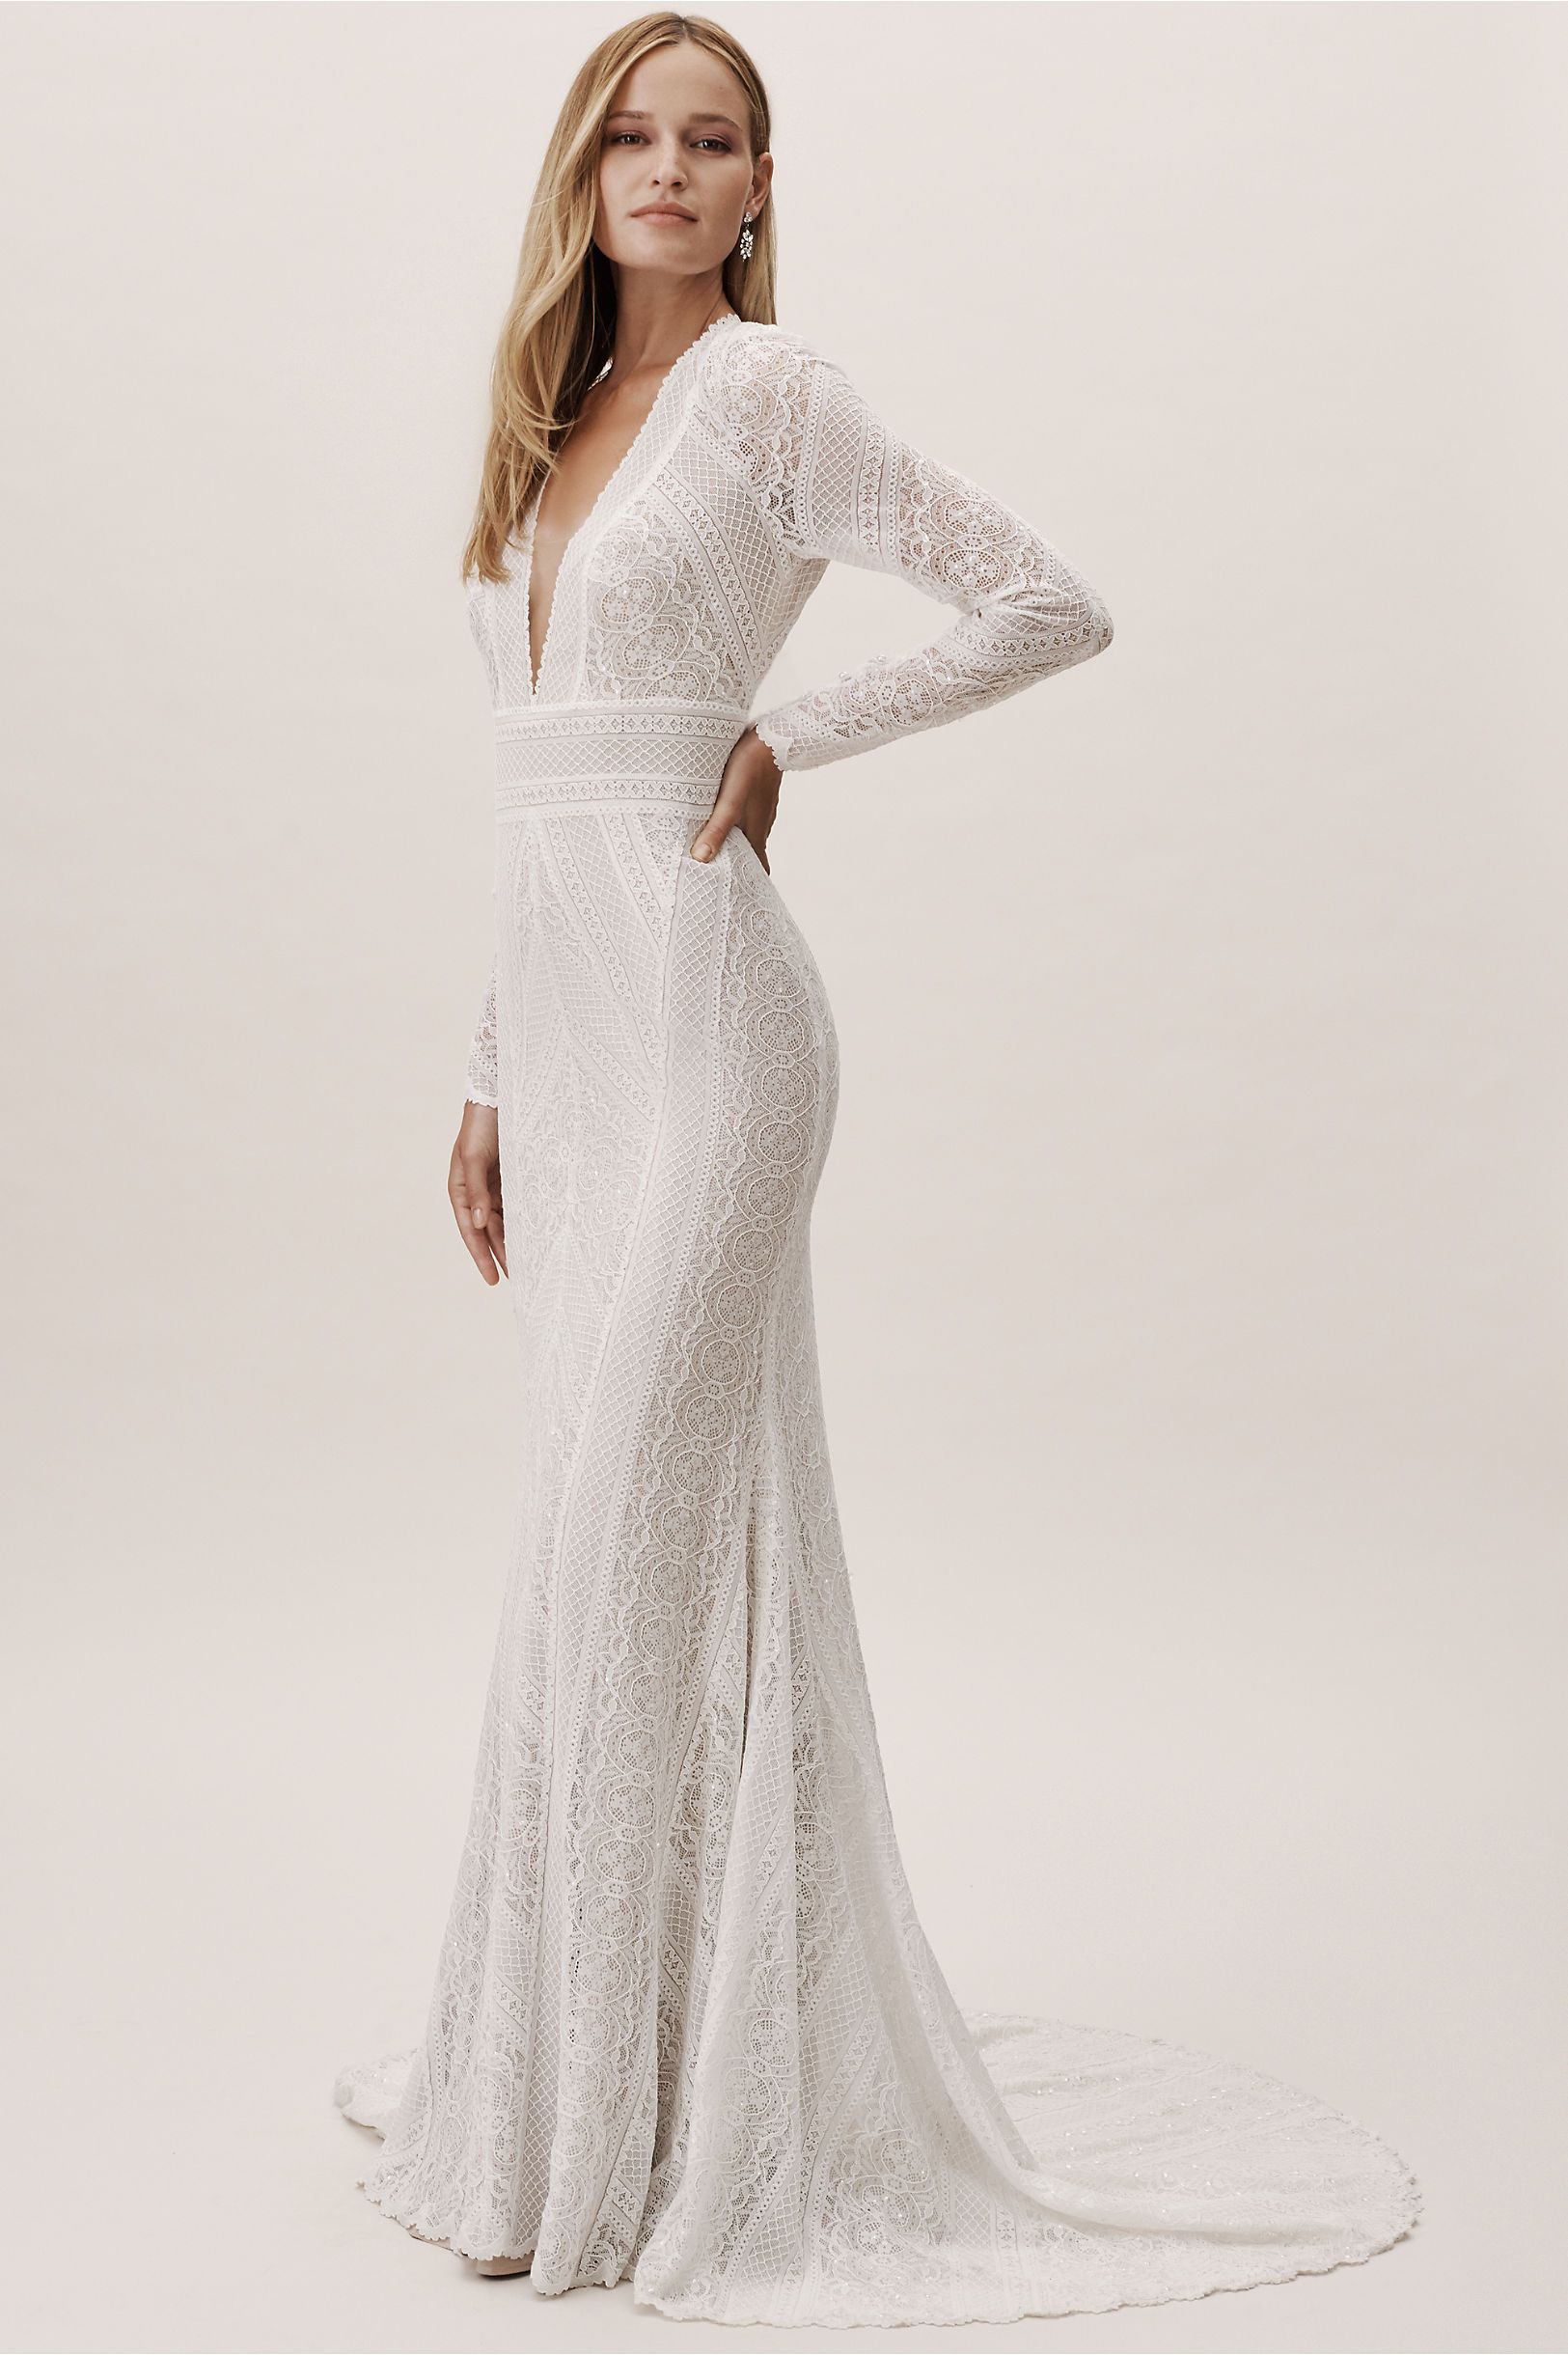 Summer by Wtoo by Watters From BHLDN